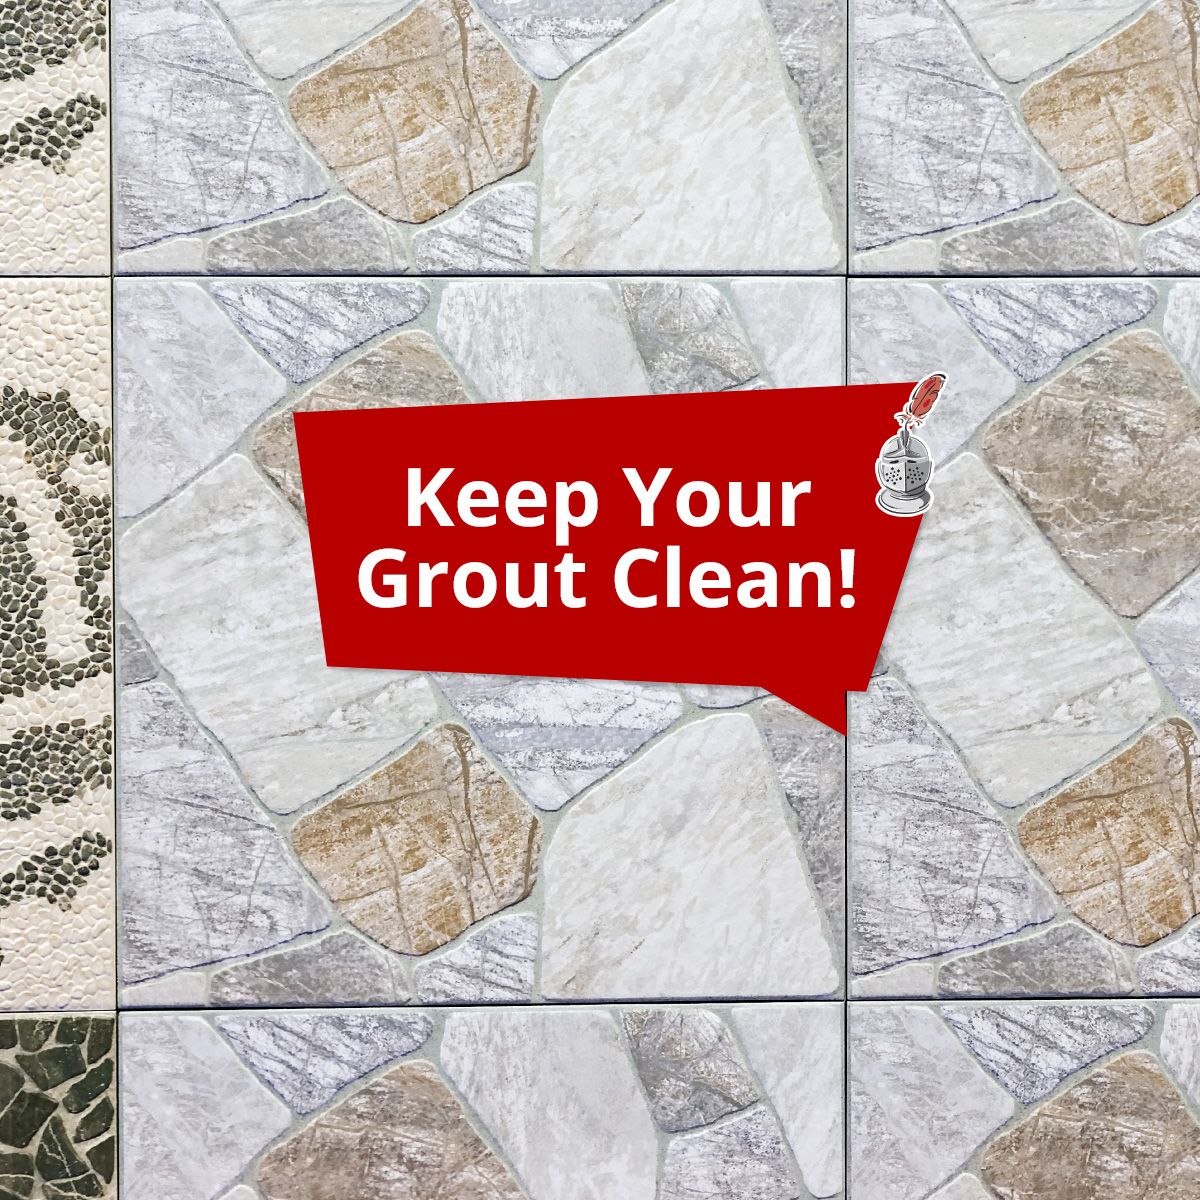 Keep Your Grout Clean!